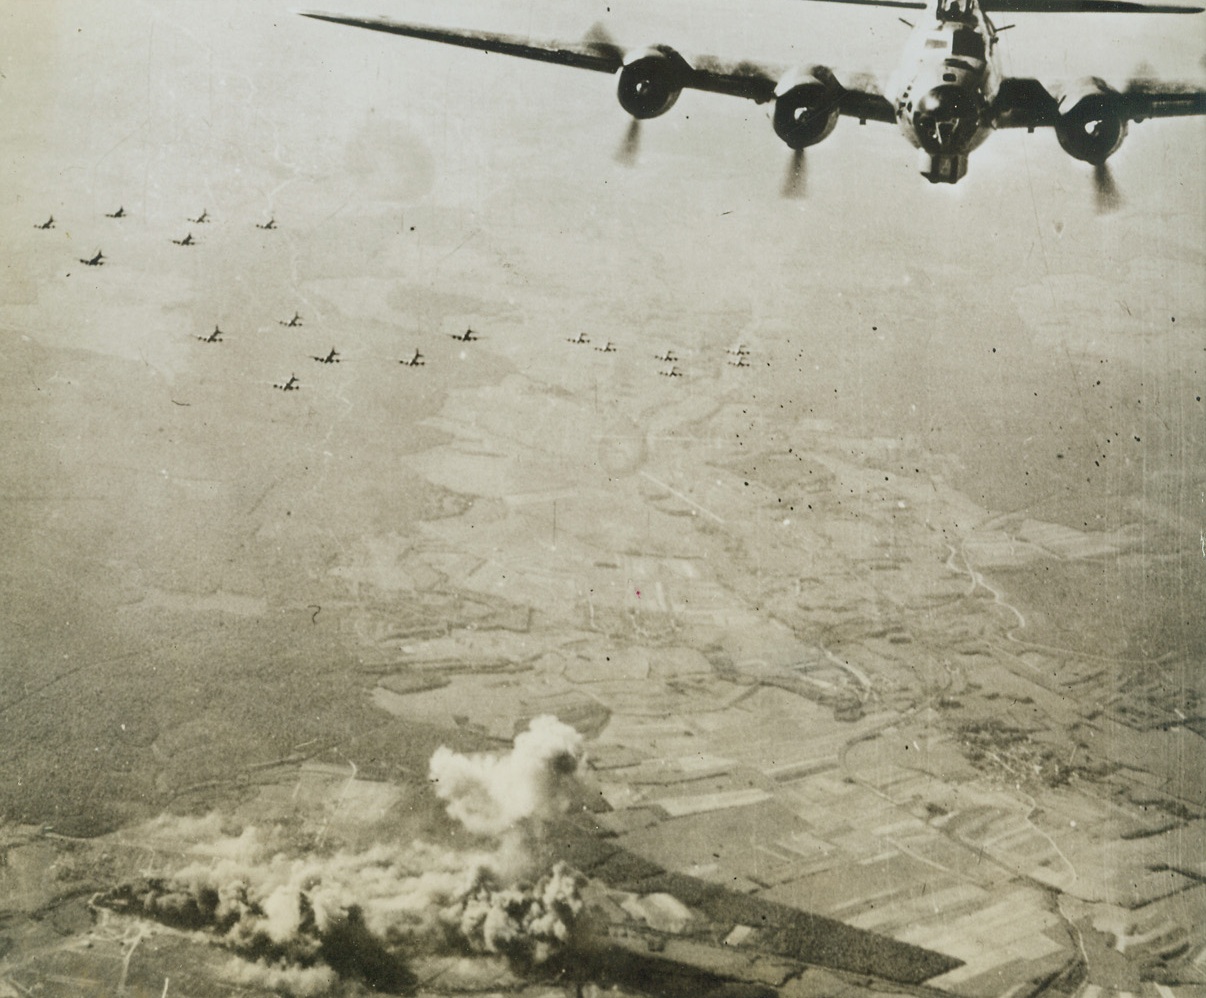 Nazi Airfield Blasted, 6/2/1944. FRANCE—Flying Fortresses of the U.S. Army 8th Air Force head for home, leaving the Nazi airfield at St. Dizier, near Reims, burning. Hits were registered on hangars and fuel storage sheds. Today our air forces continued the pre-invasion pounding of the invasion coast in attacks on Northern France, in Belgium and Holland. Credit: USAAF photo from ACME.;